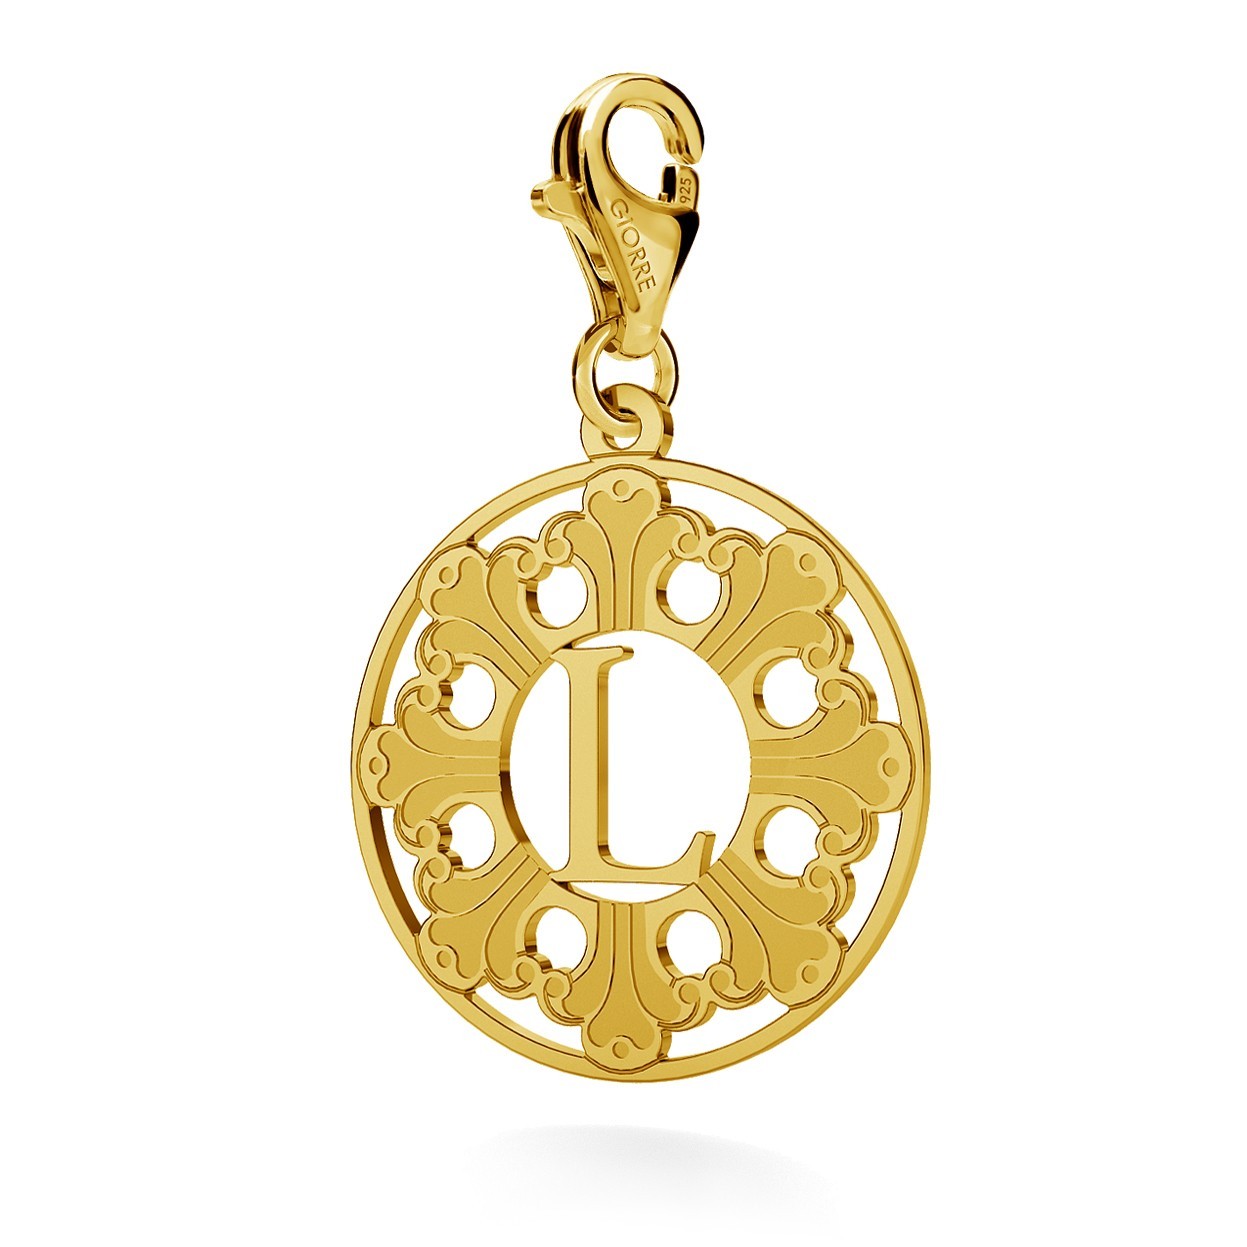 CHARM 146, GRENADE, STERLING SILVER (925) RHODIUM OR GOLD PLATED